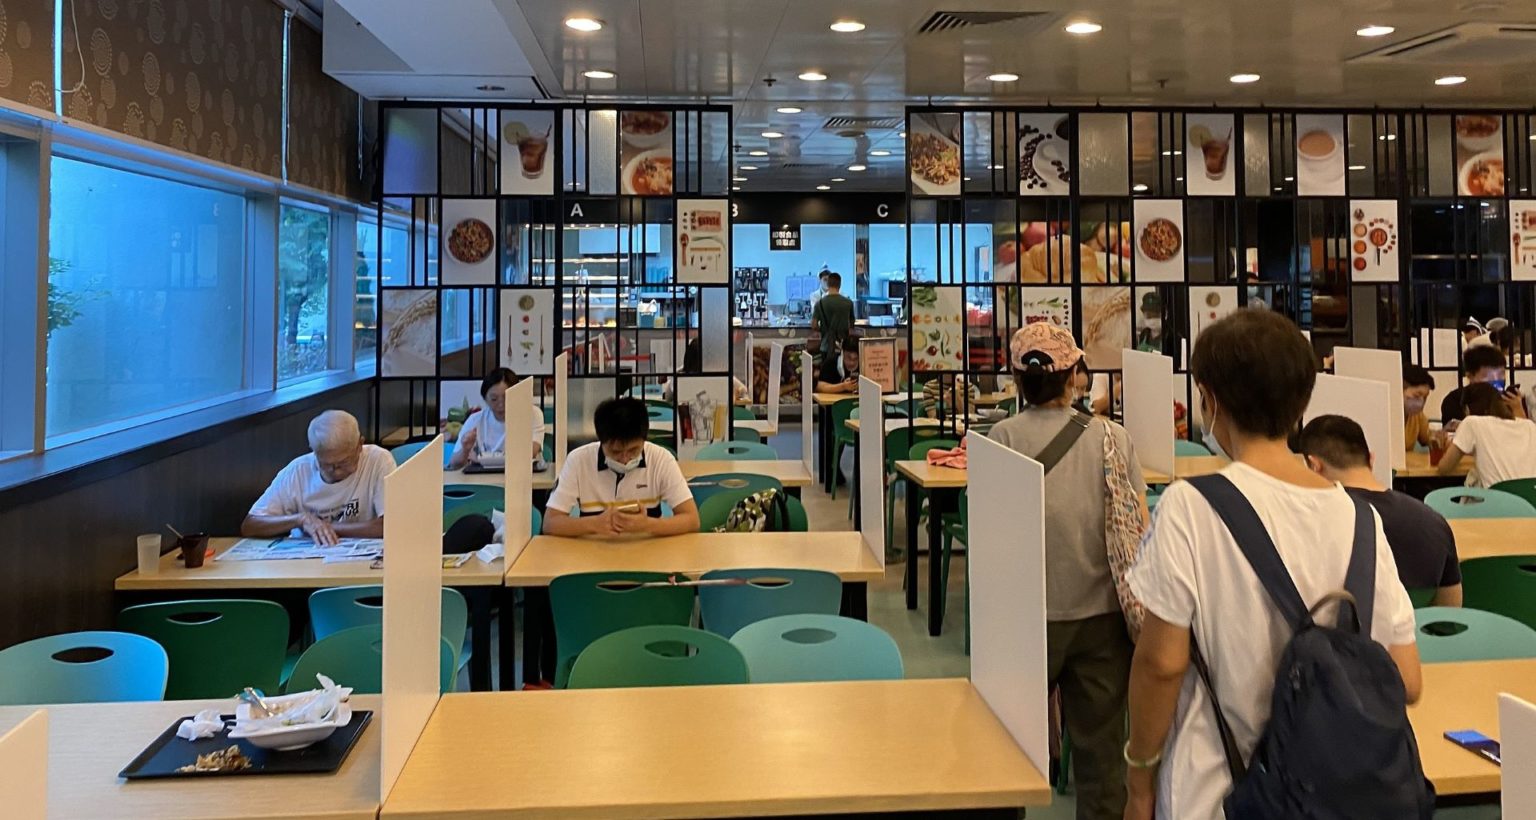 Table partitions at a Hong Kong restaurant placed as part of the city's social distancing restrictions. Some diners are wearing face masks.